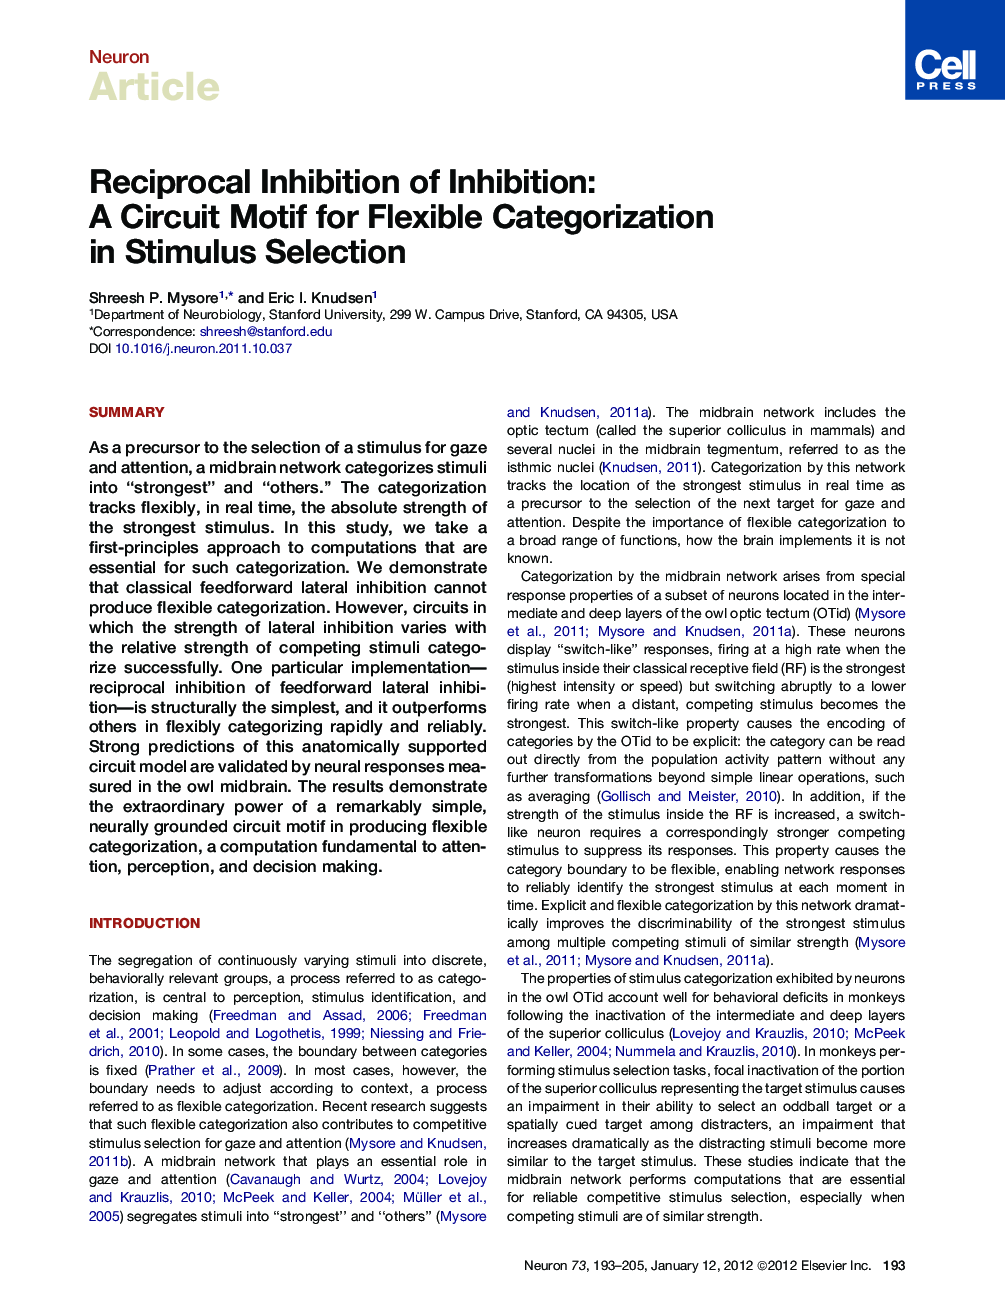 Reciprocal Inhibition of Inhibition: A Circuit Motif for Flexible Categorization in Stimulus Selection